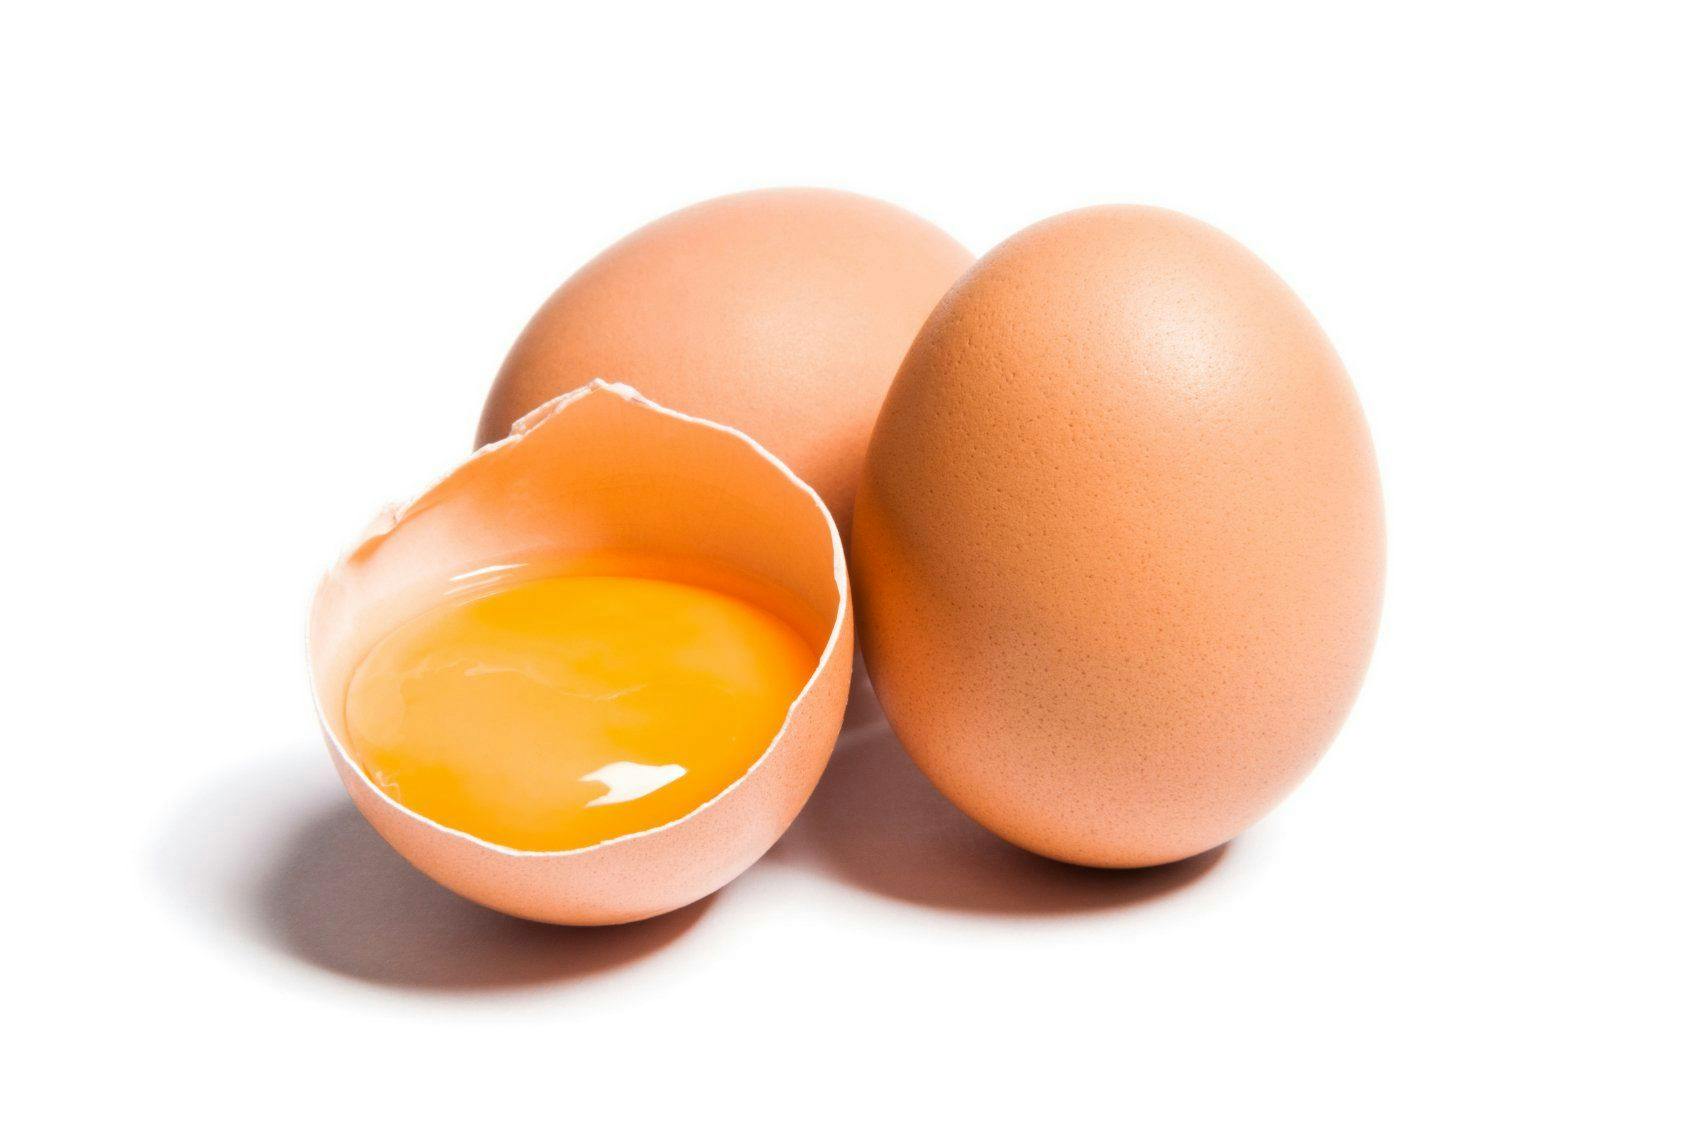 Want to differentiate your protein sports product? Use eggs, says firm at SupplySide West